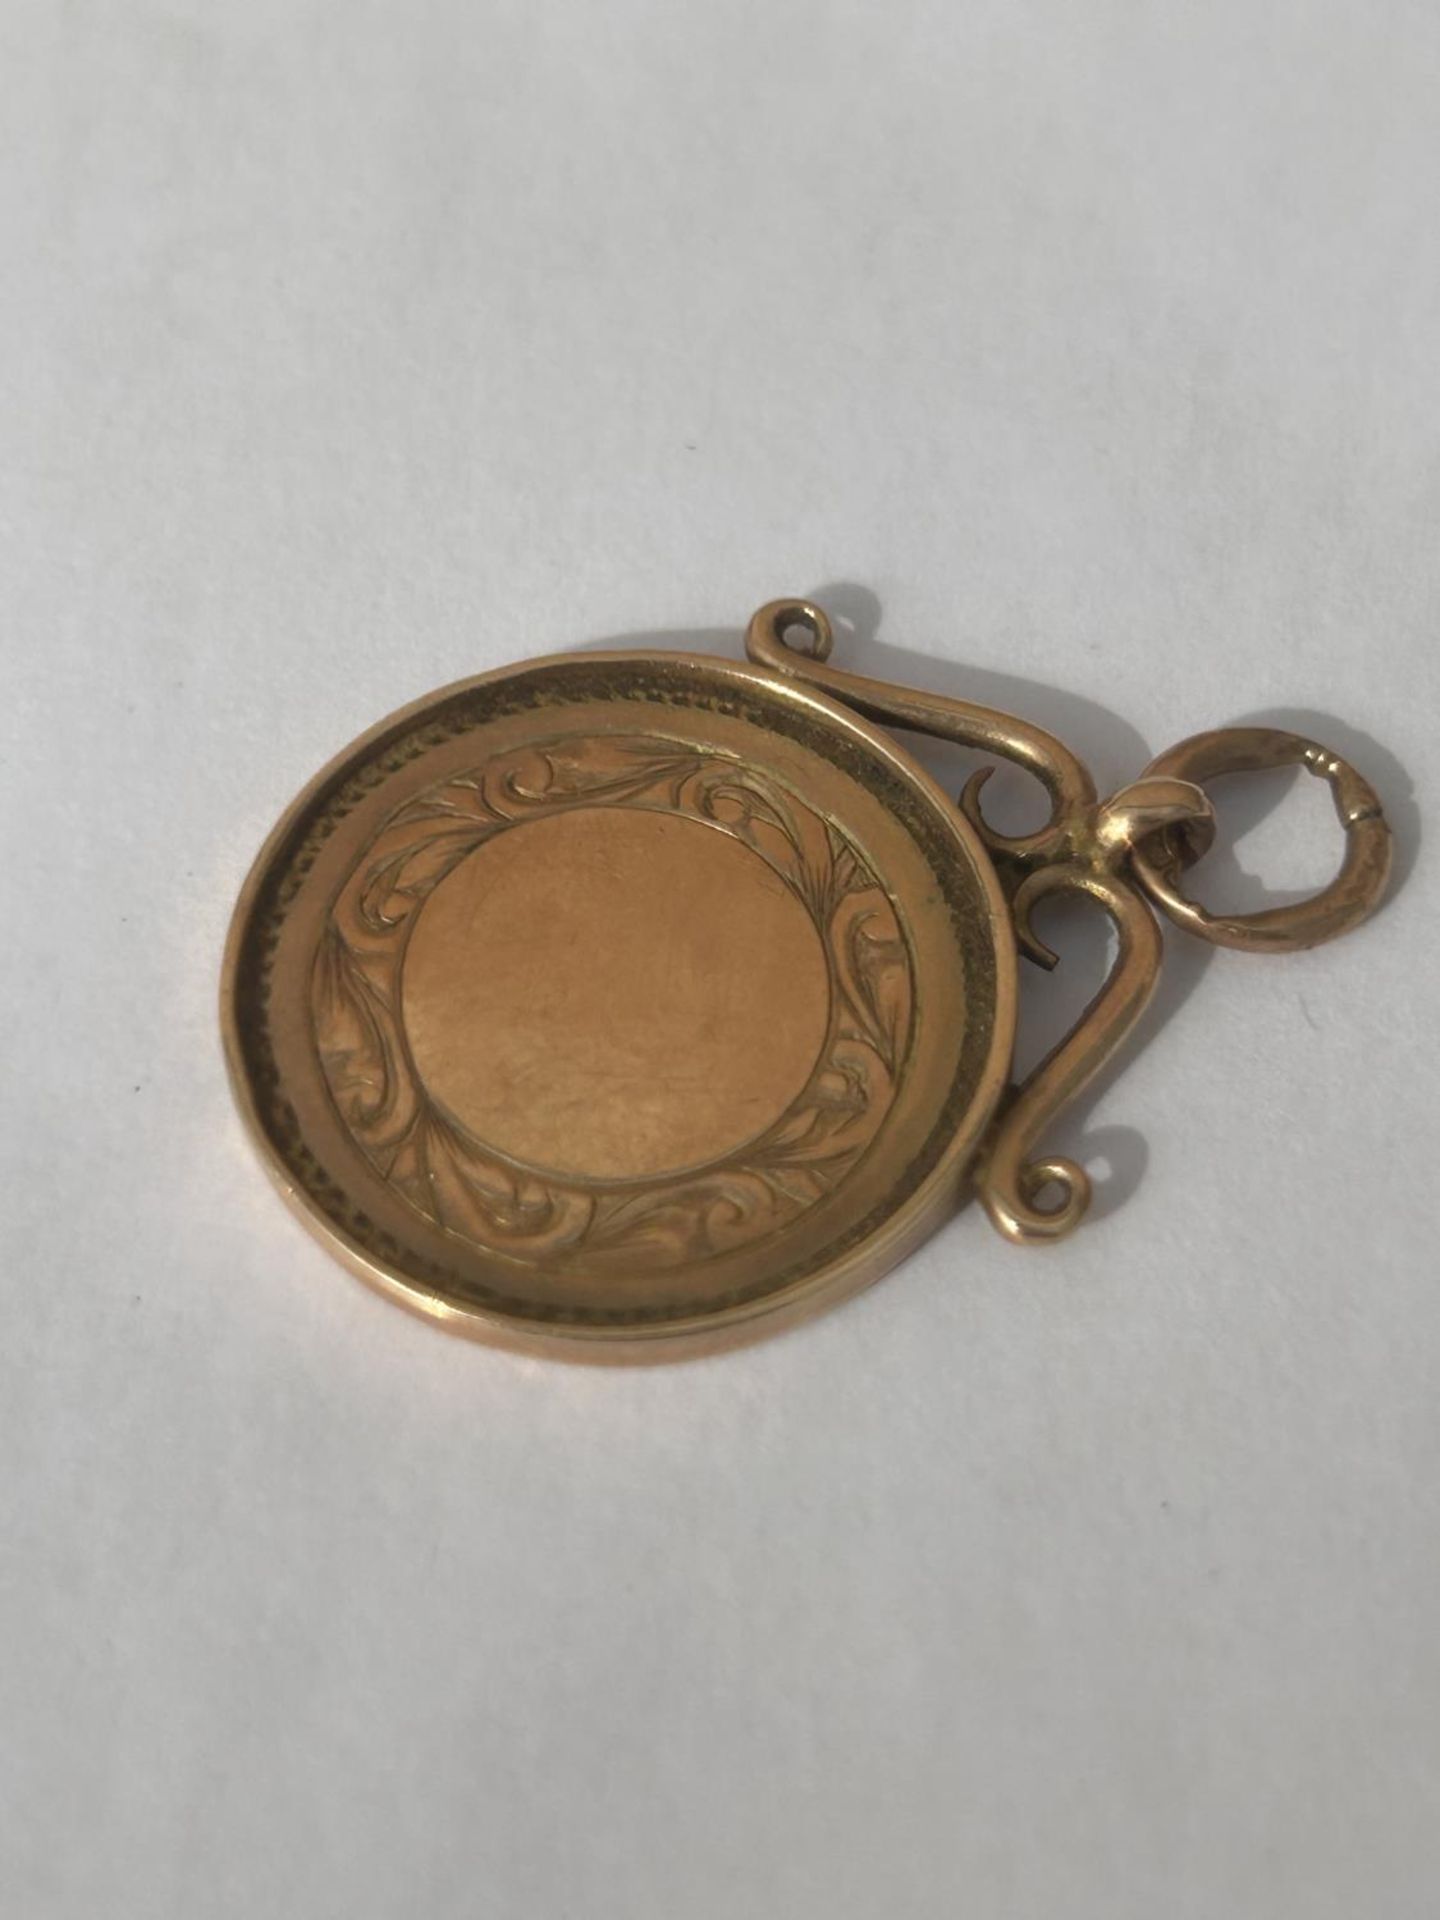 A HALLMARKED 9CT GOLD BIRMINGHAM SPORTING FOB INSCRIBED "L & D.C.L CHAMPIONS H.HULME 1920" MAKERS - Image 2 of 4